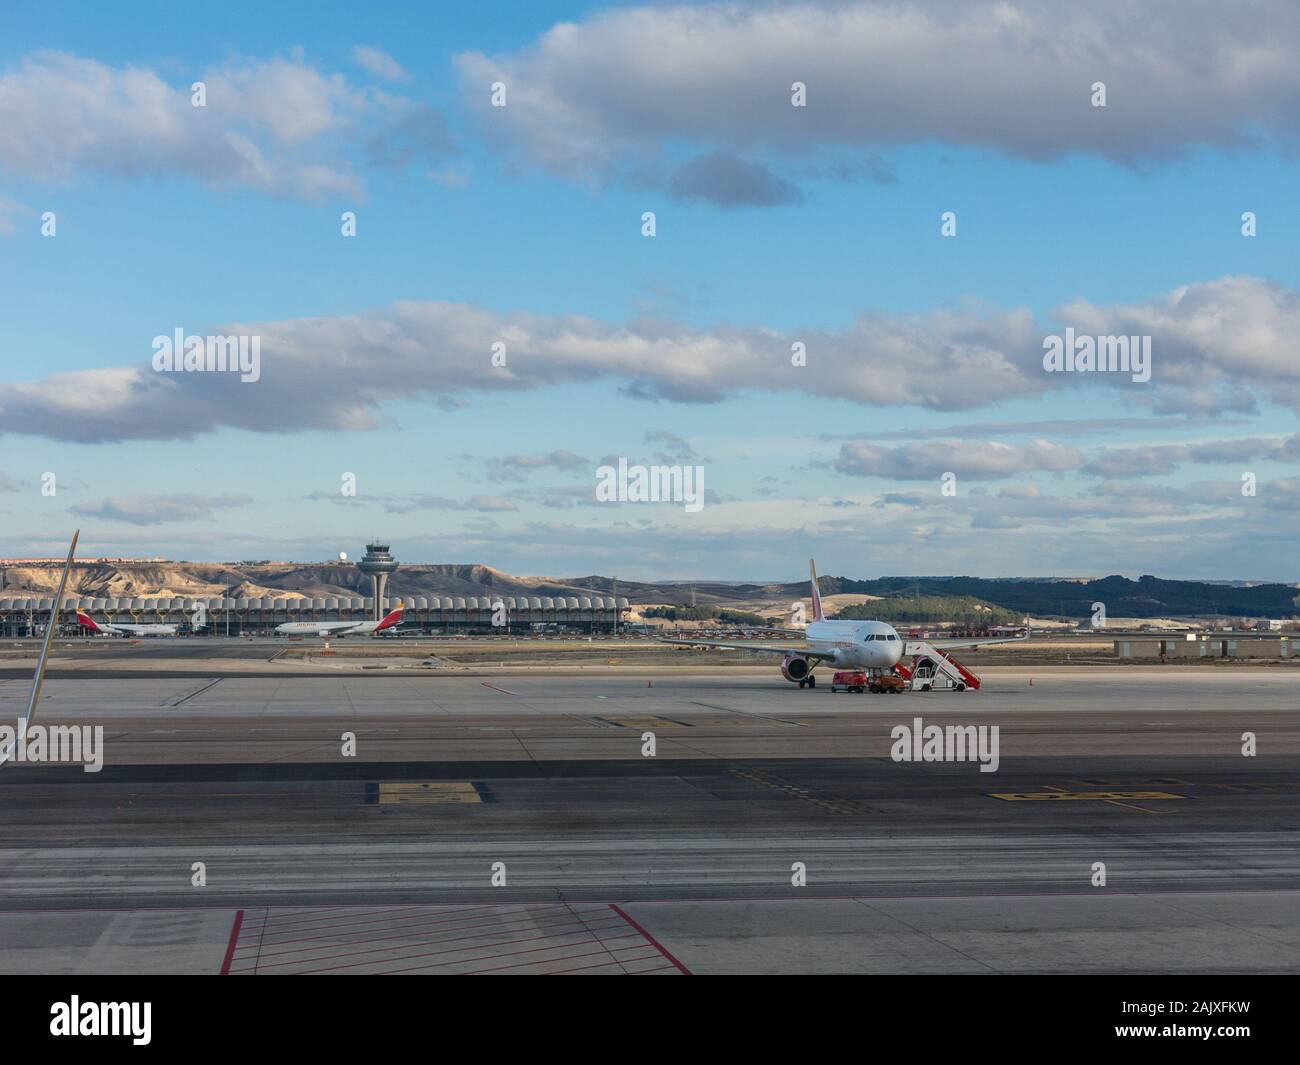 Madrid, Spain - January 27, 2018: A plane prepares to take off on the runway of Terminal T4 the Adolfo Suarez Madrid Barajas Airport. Barajas is the m Stock Photo